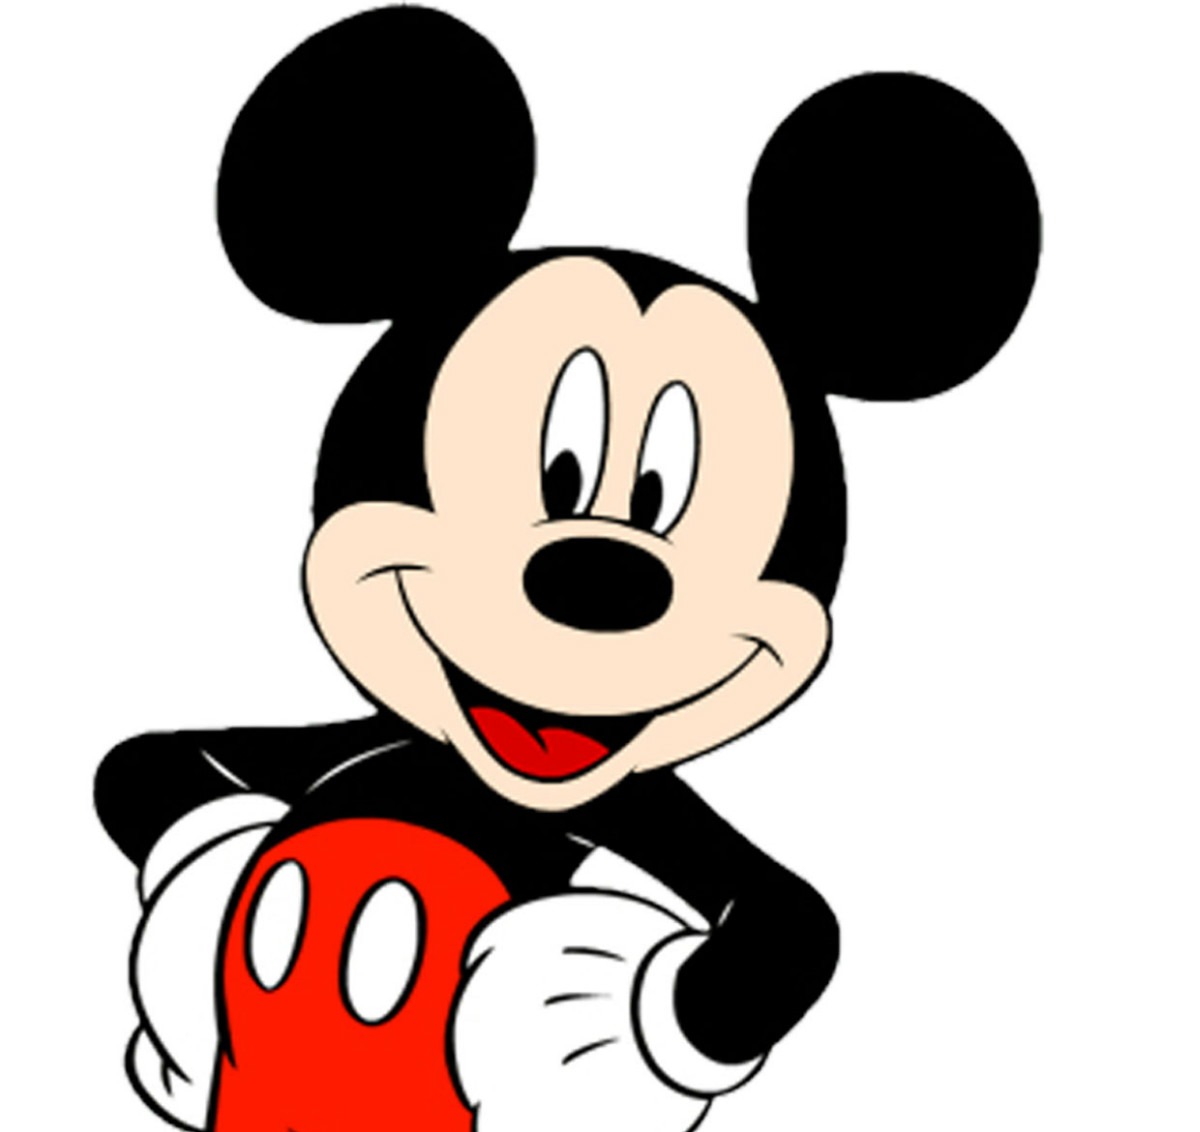 Mickey Mouse Cartoon | Free Wallpapers Pictures - ClipArt Best ...